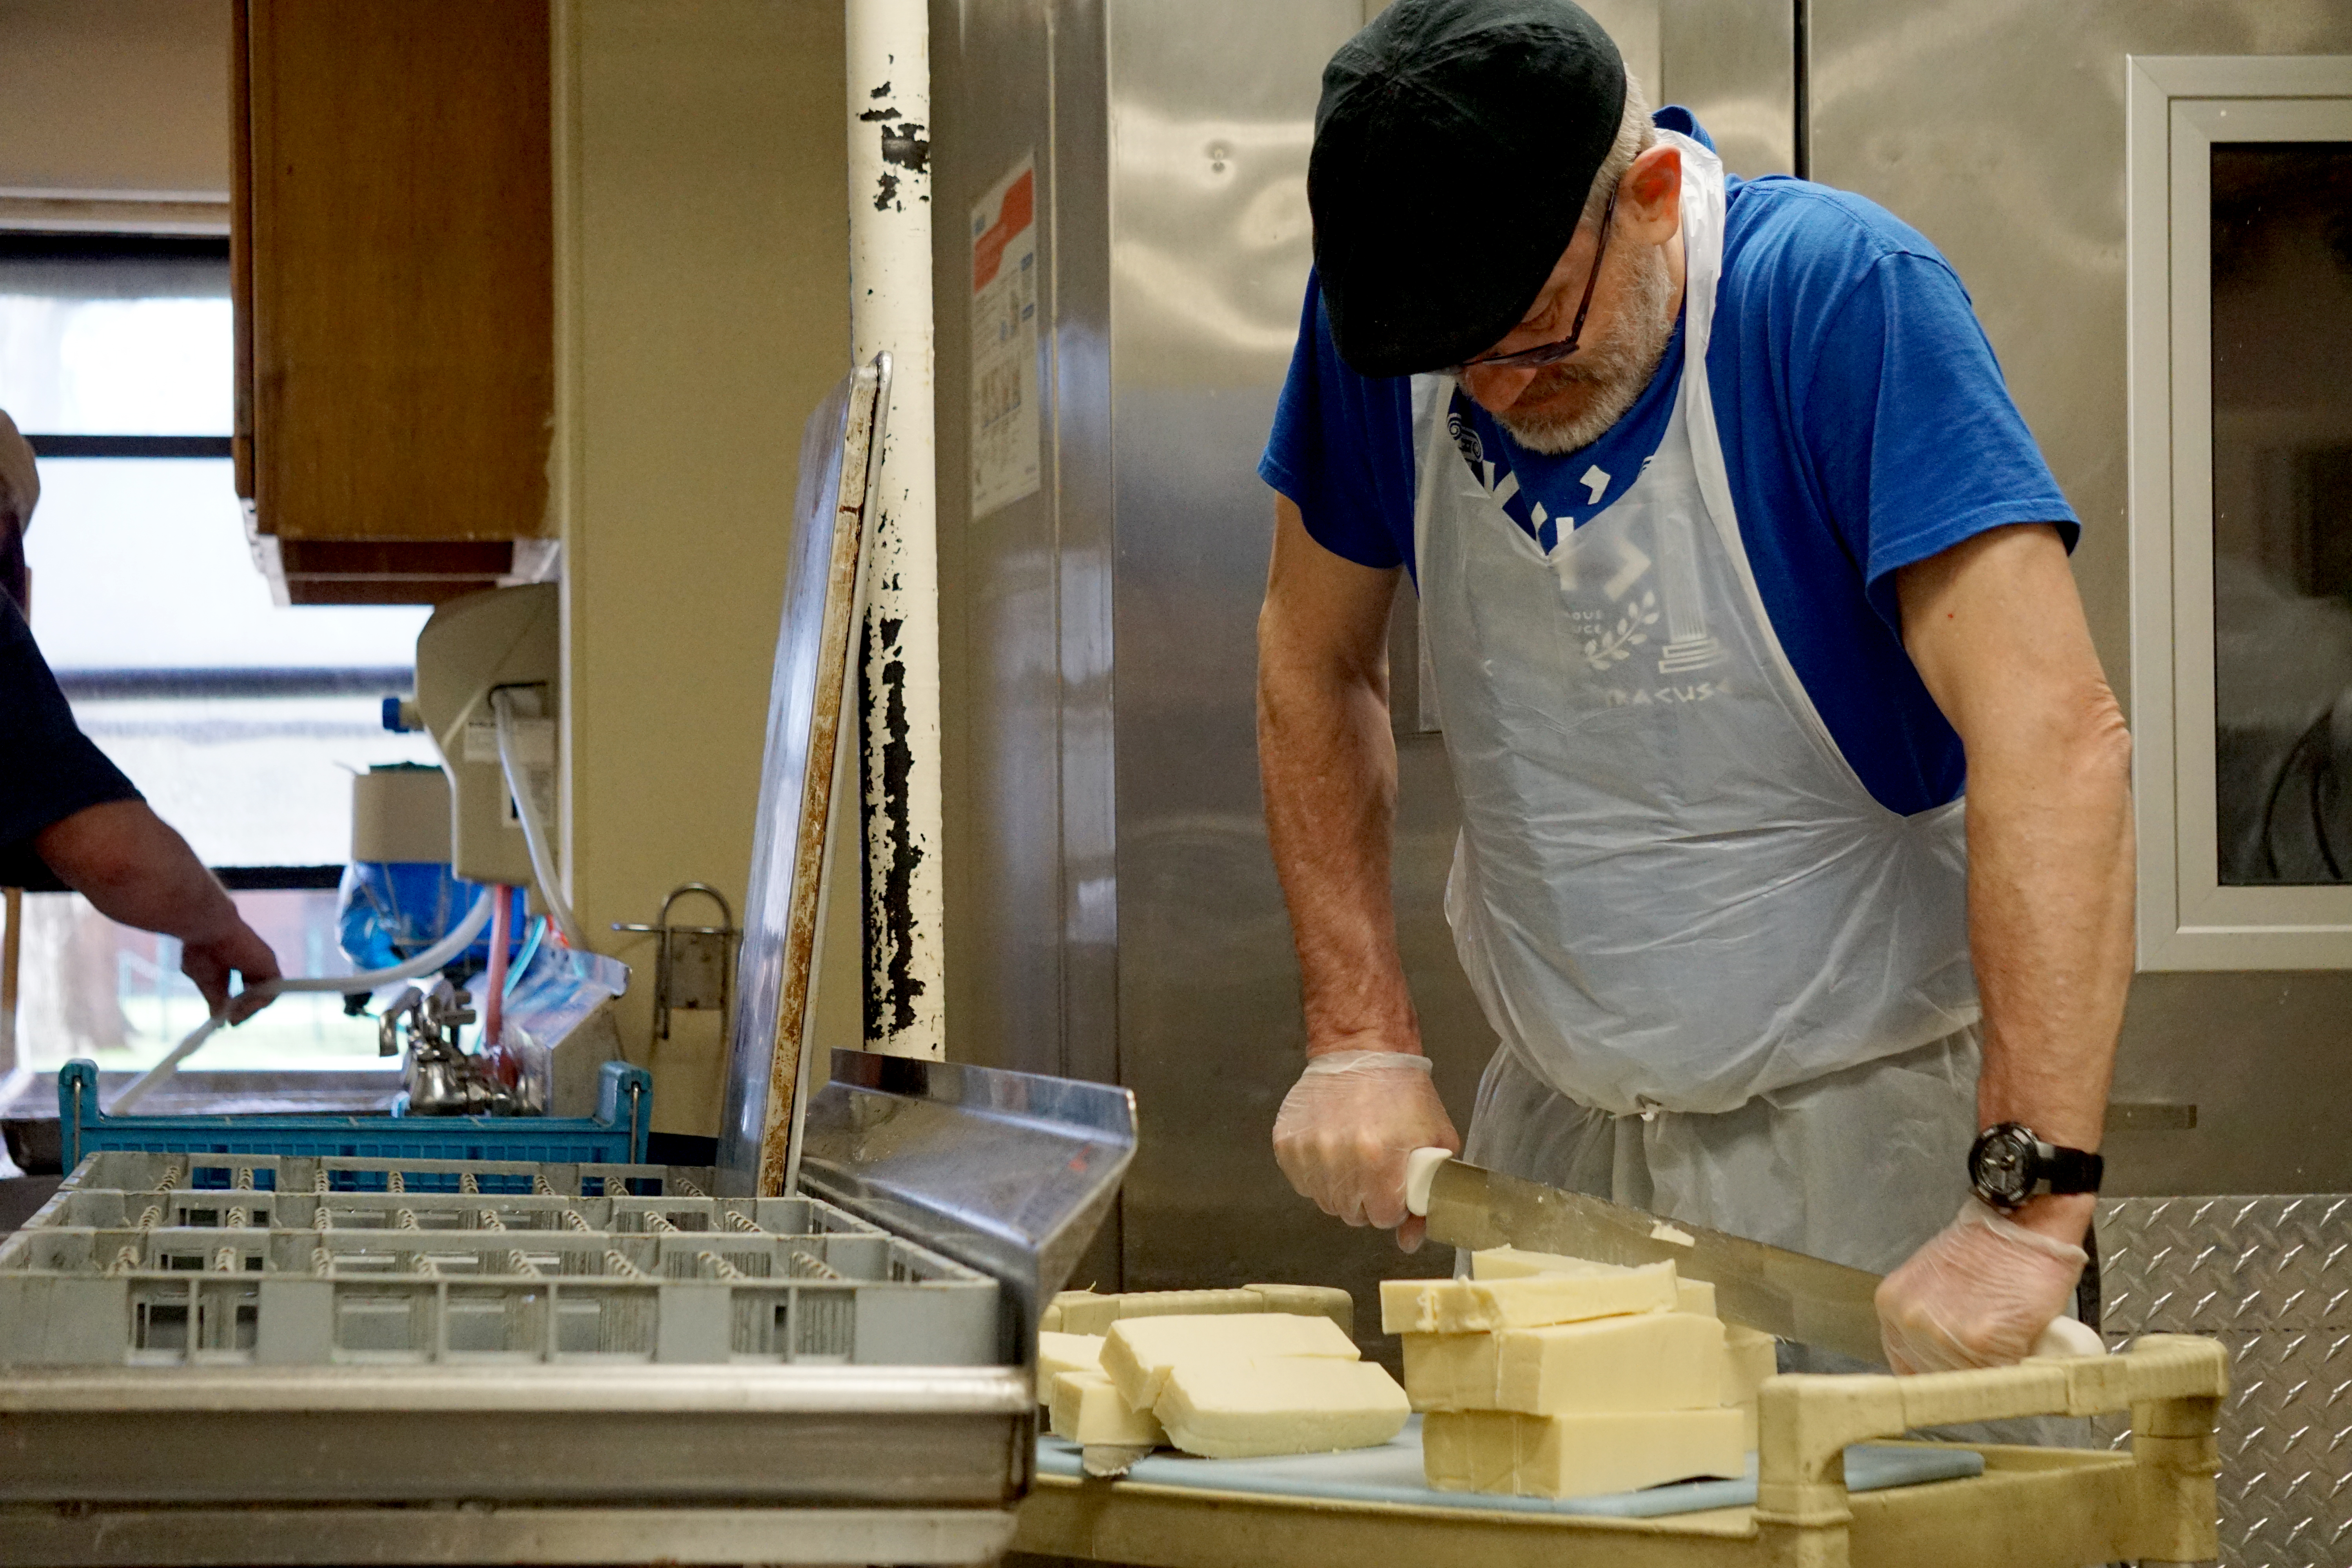 A volunteer portions out servings of cheese to be included in the meals delivered to the Meals on Wheels clientele. The organization services 33 routes across Onondaga County, including the city of Syracuse, Nedrow, the Onondaga Nation, Skaneateles, Jordan and Elbridge.